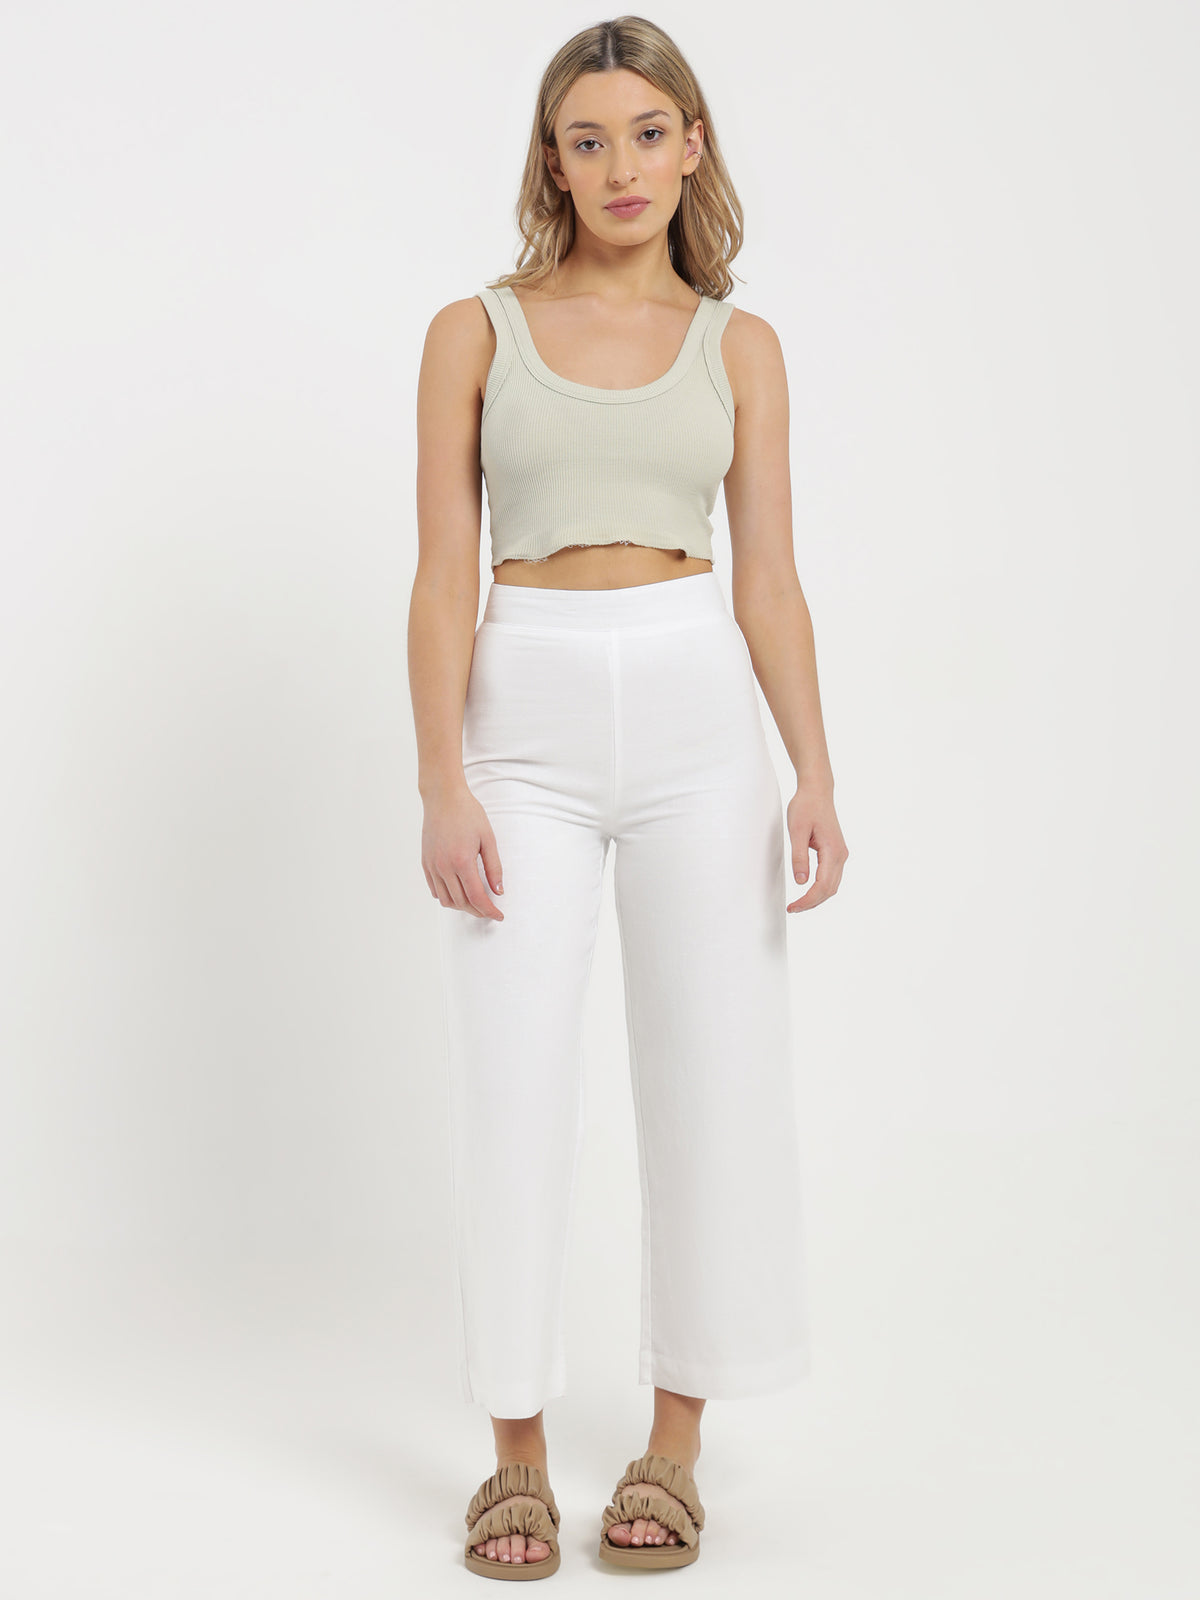 Classic Culotte Pants in White